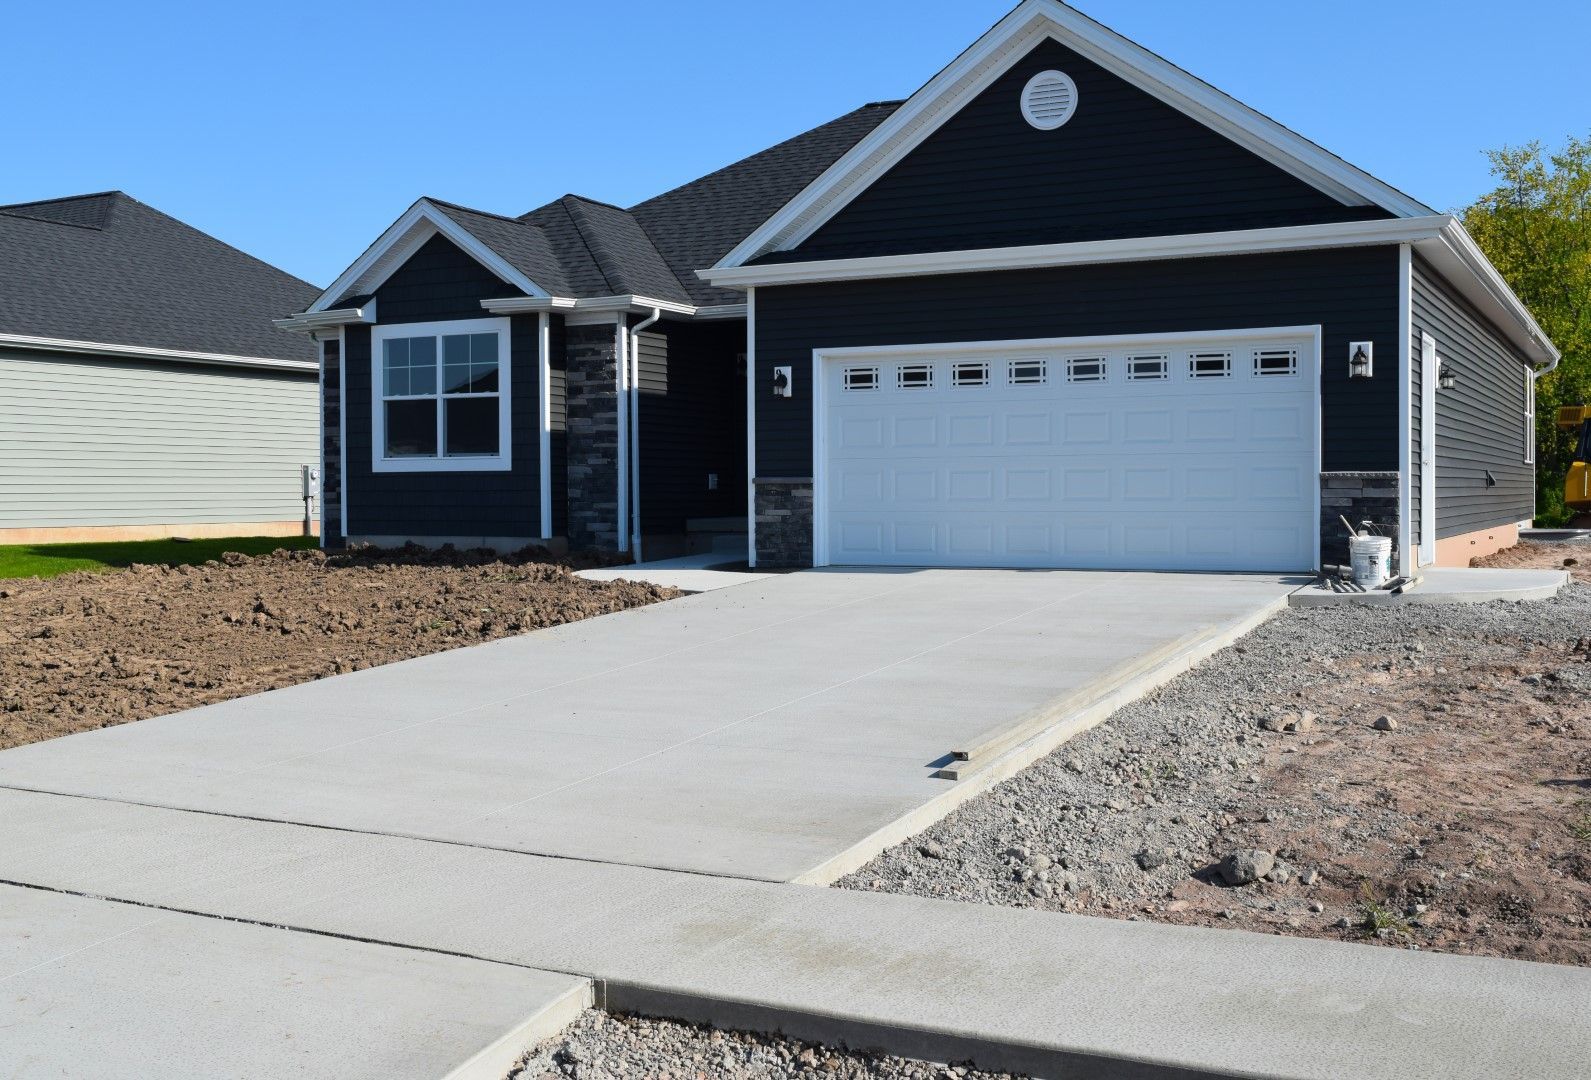 An image of a home with new driveway and sidewalk being built in Kent, OH.